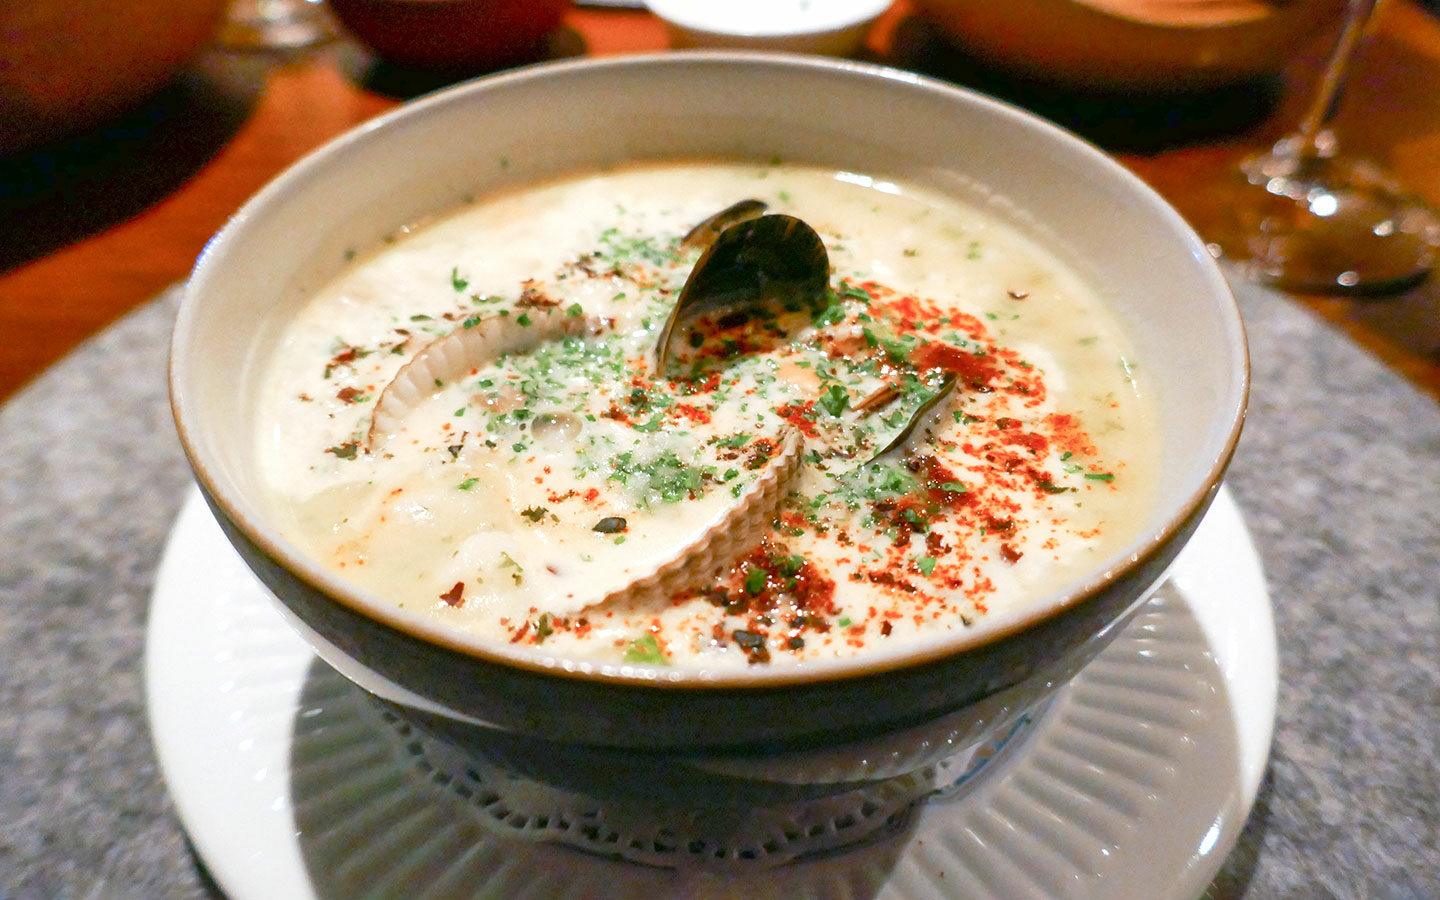 Seafood chowder at the Michelin-starred Lochbay Restaurant in Stein on the Isle of Skye